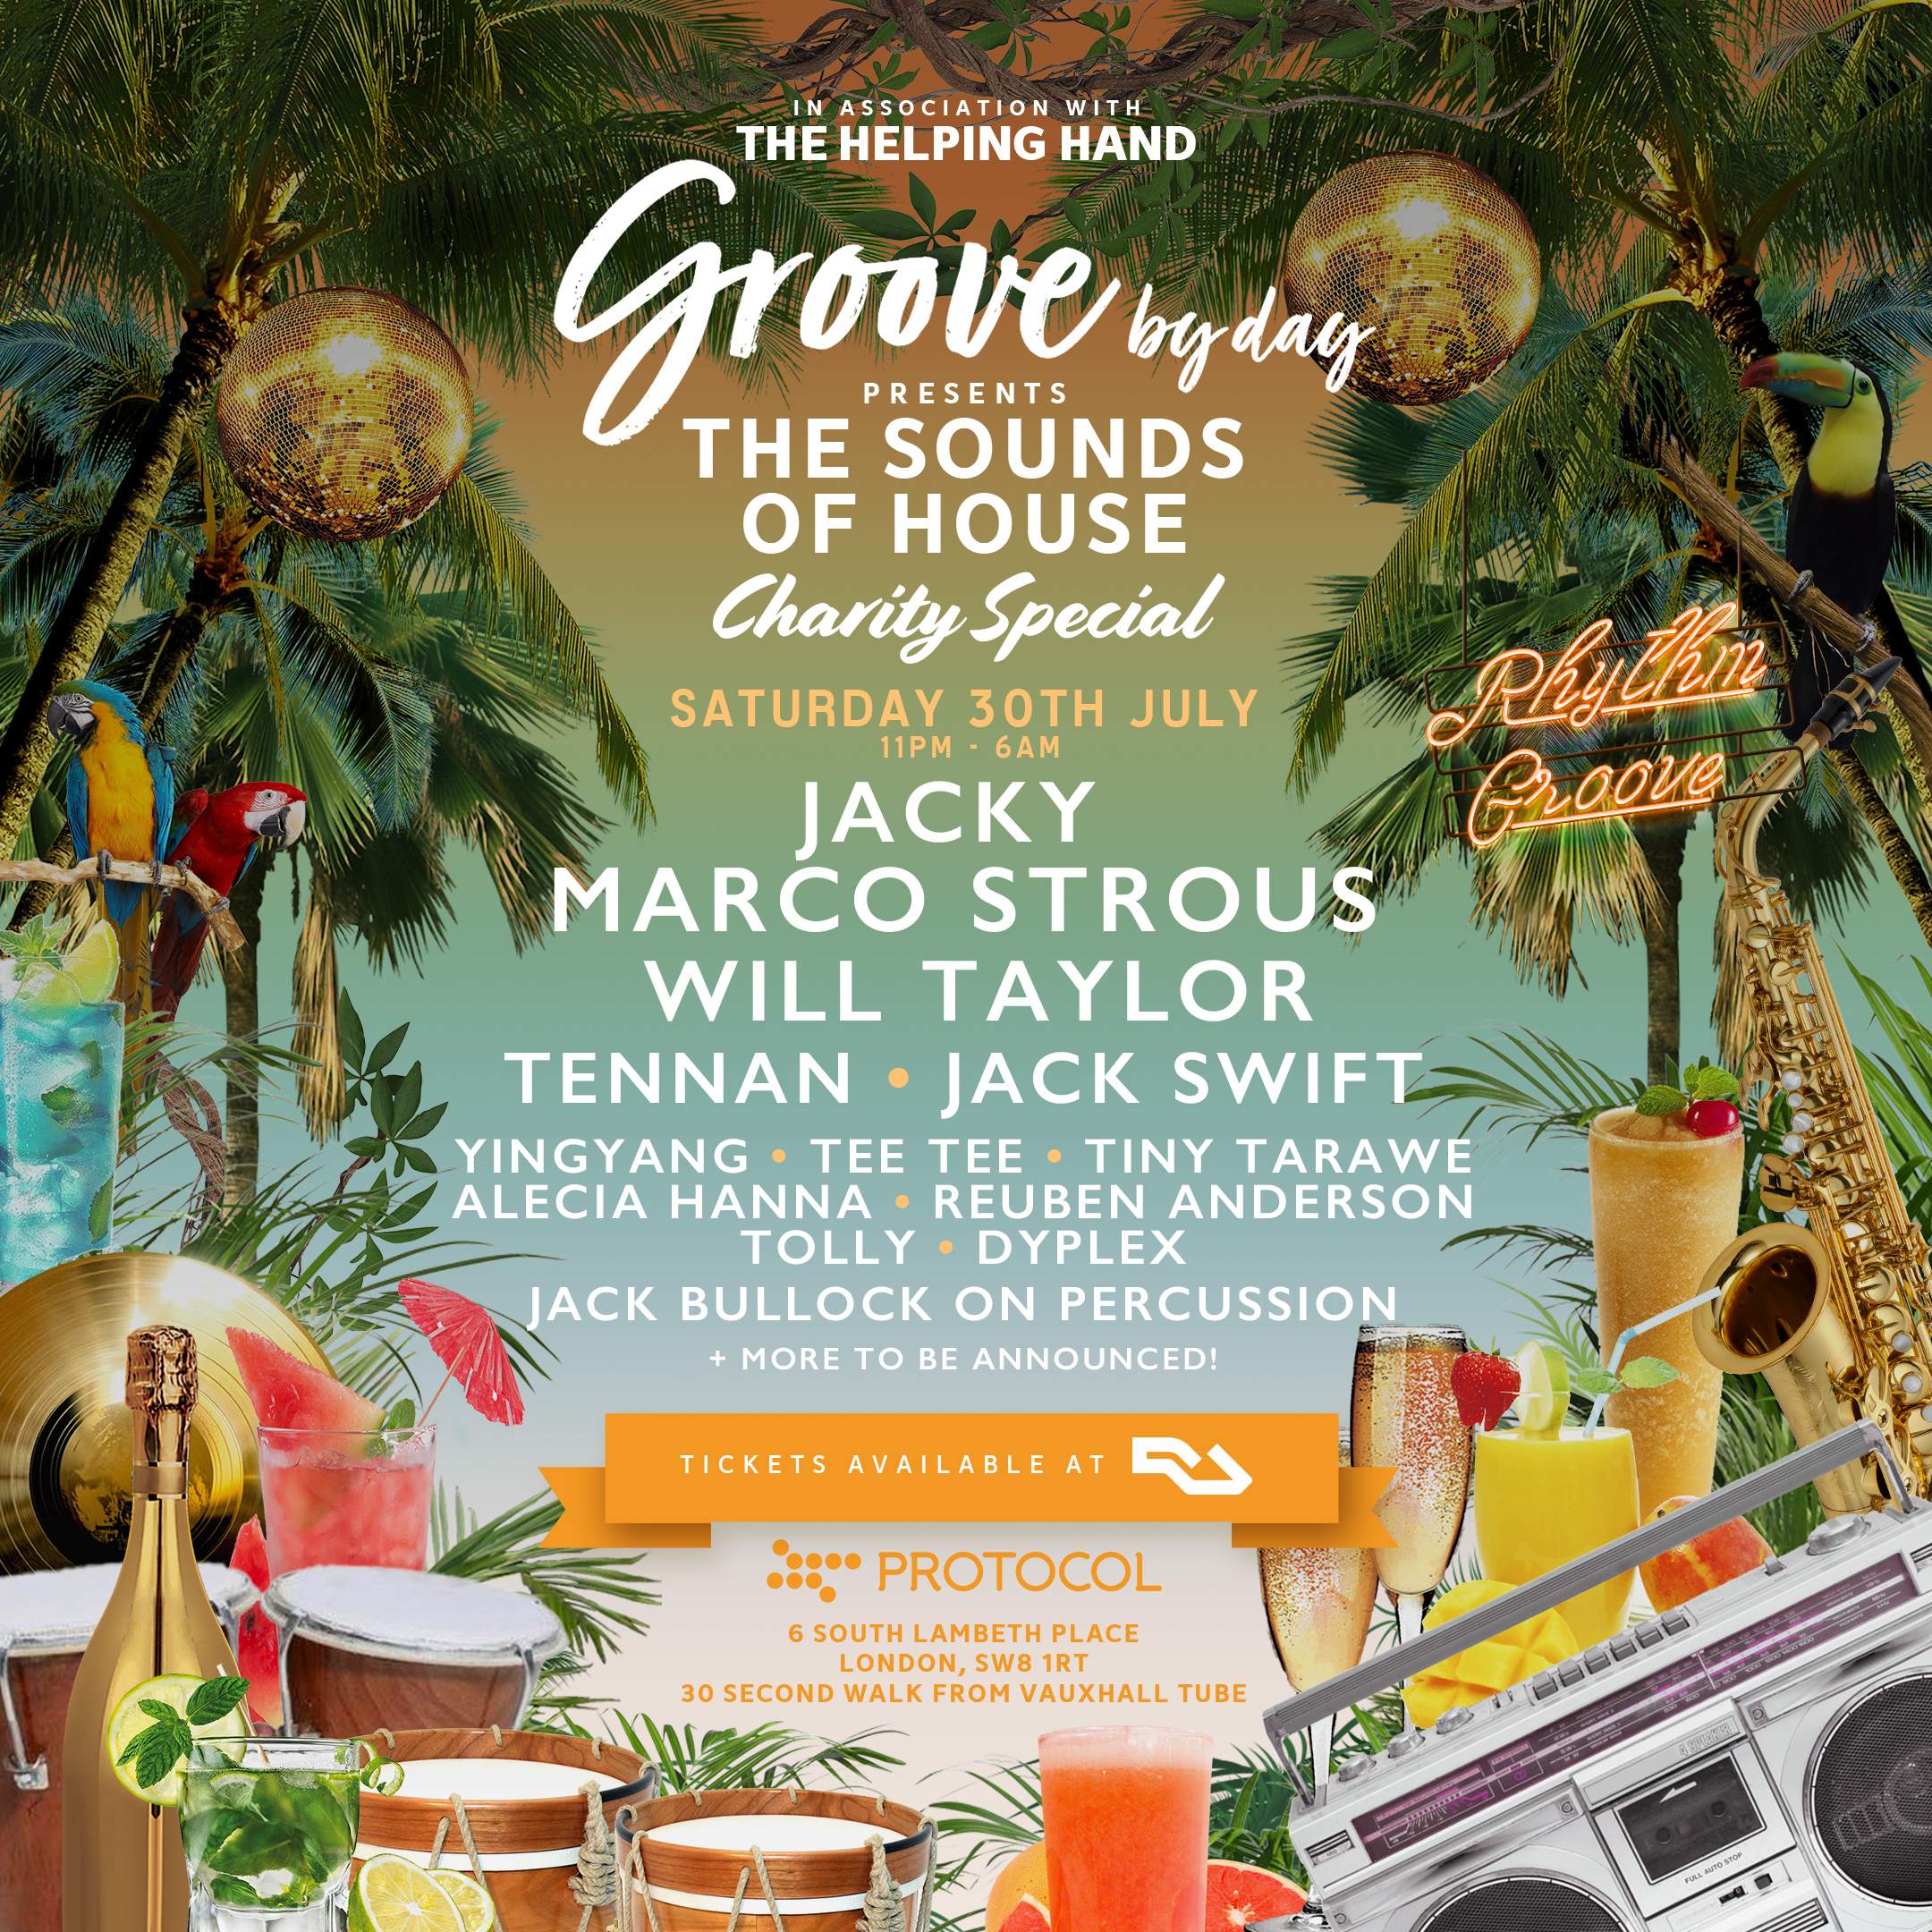 Groove By Night - JACKY, Marco Strous, Will Taylor + more  - フライヤー表